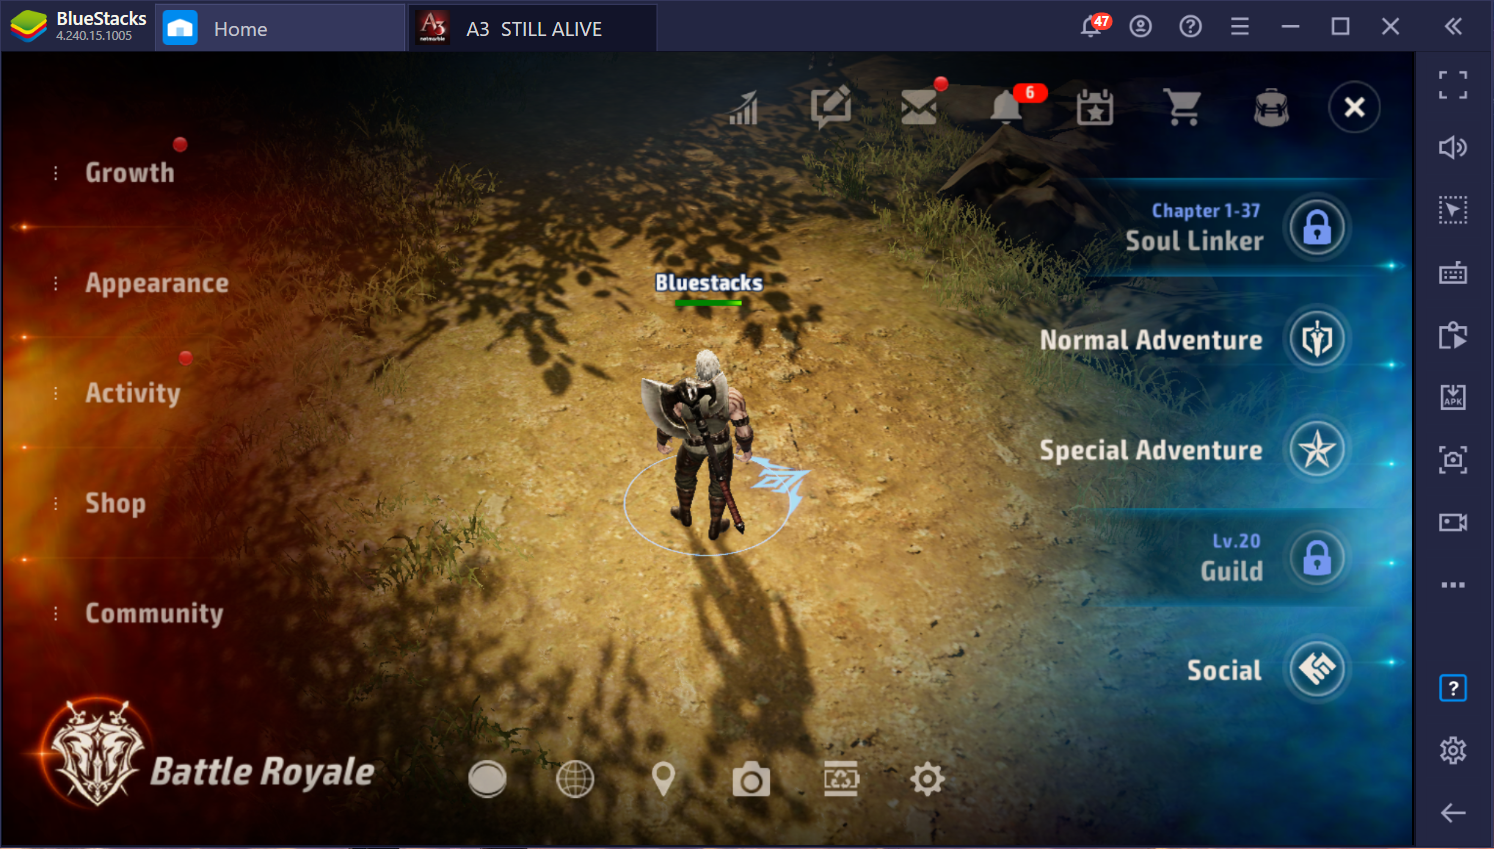 Enjoy the Combination of MMORPG & Battle Royale in A3: STILL ALIVE on PC with BlueStacks